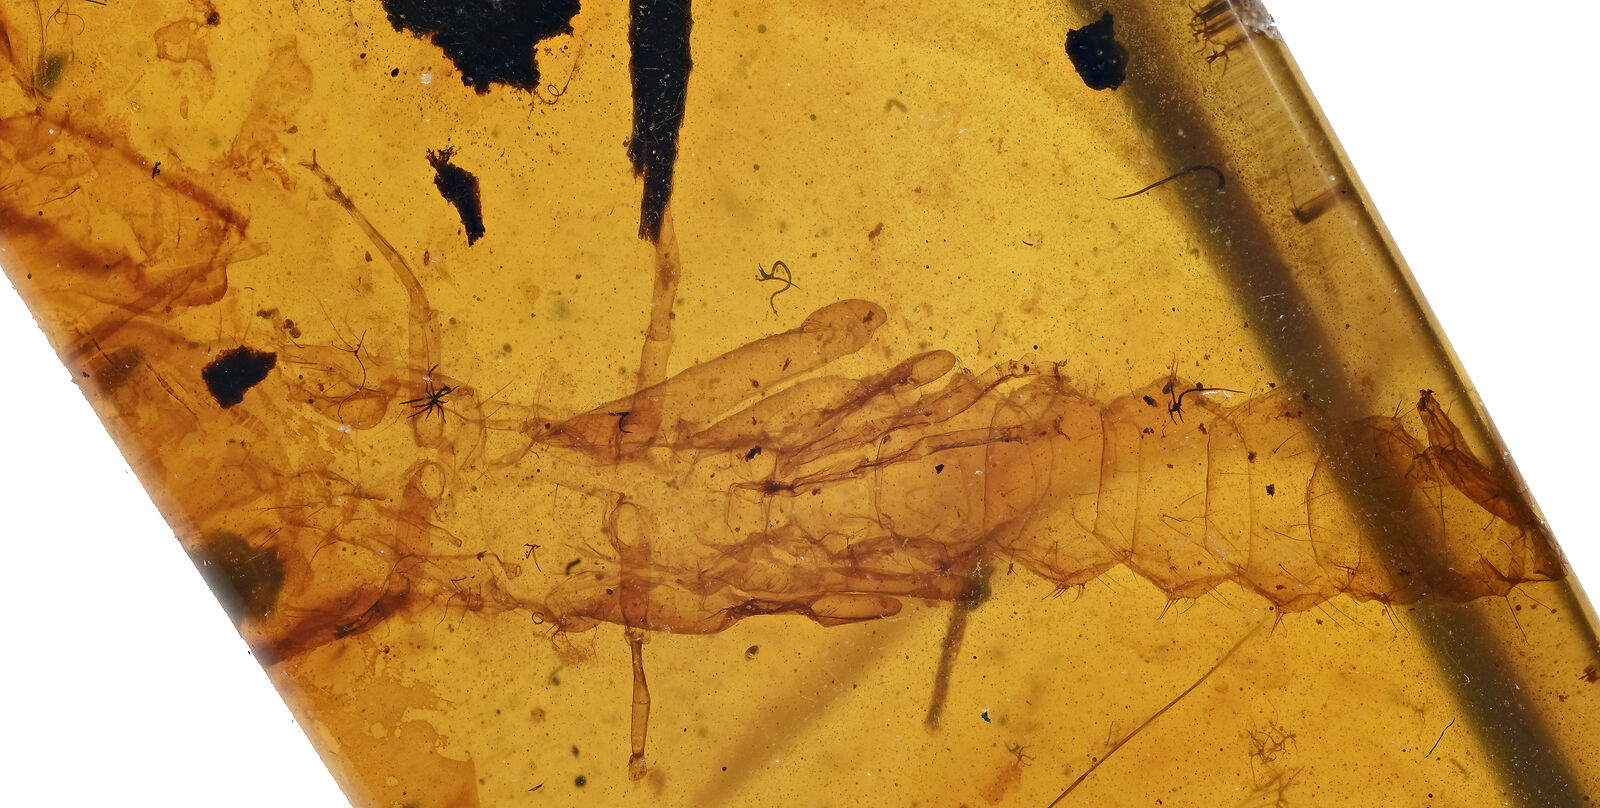 Rare Partial Scorpion, Fossil inclusion in Burmese Amber